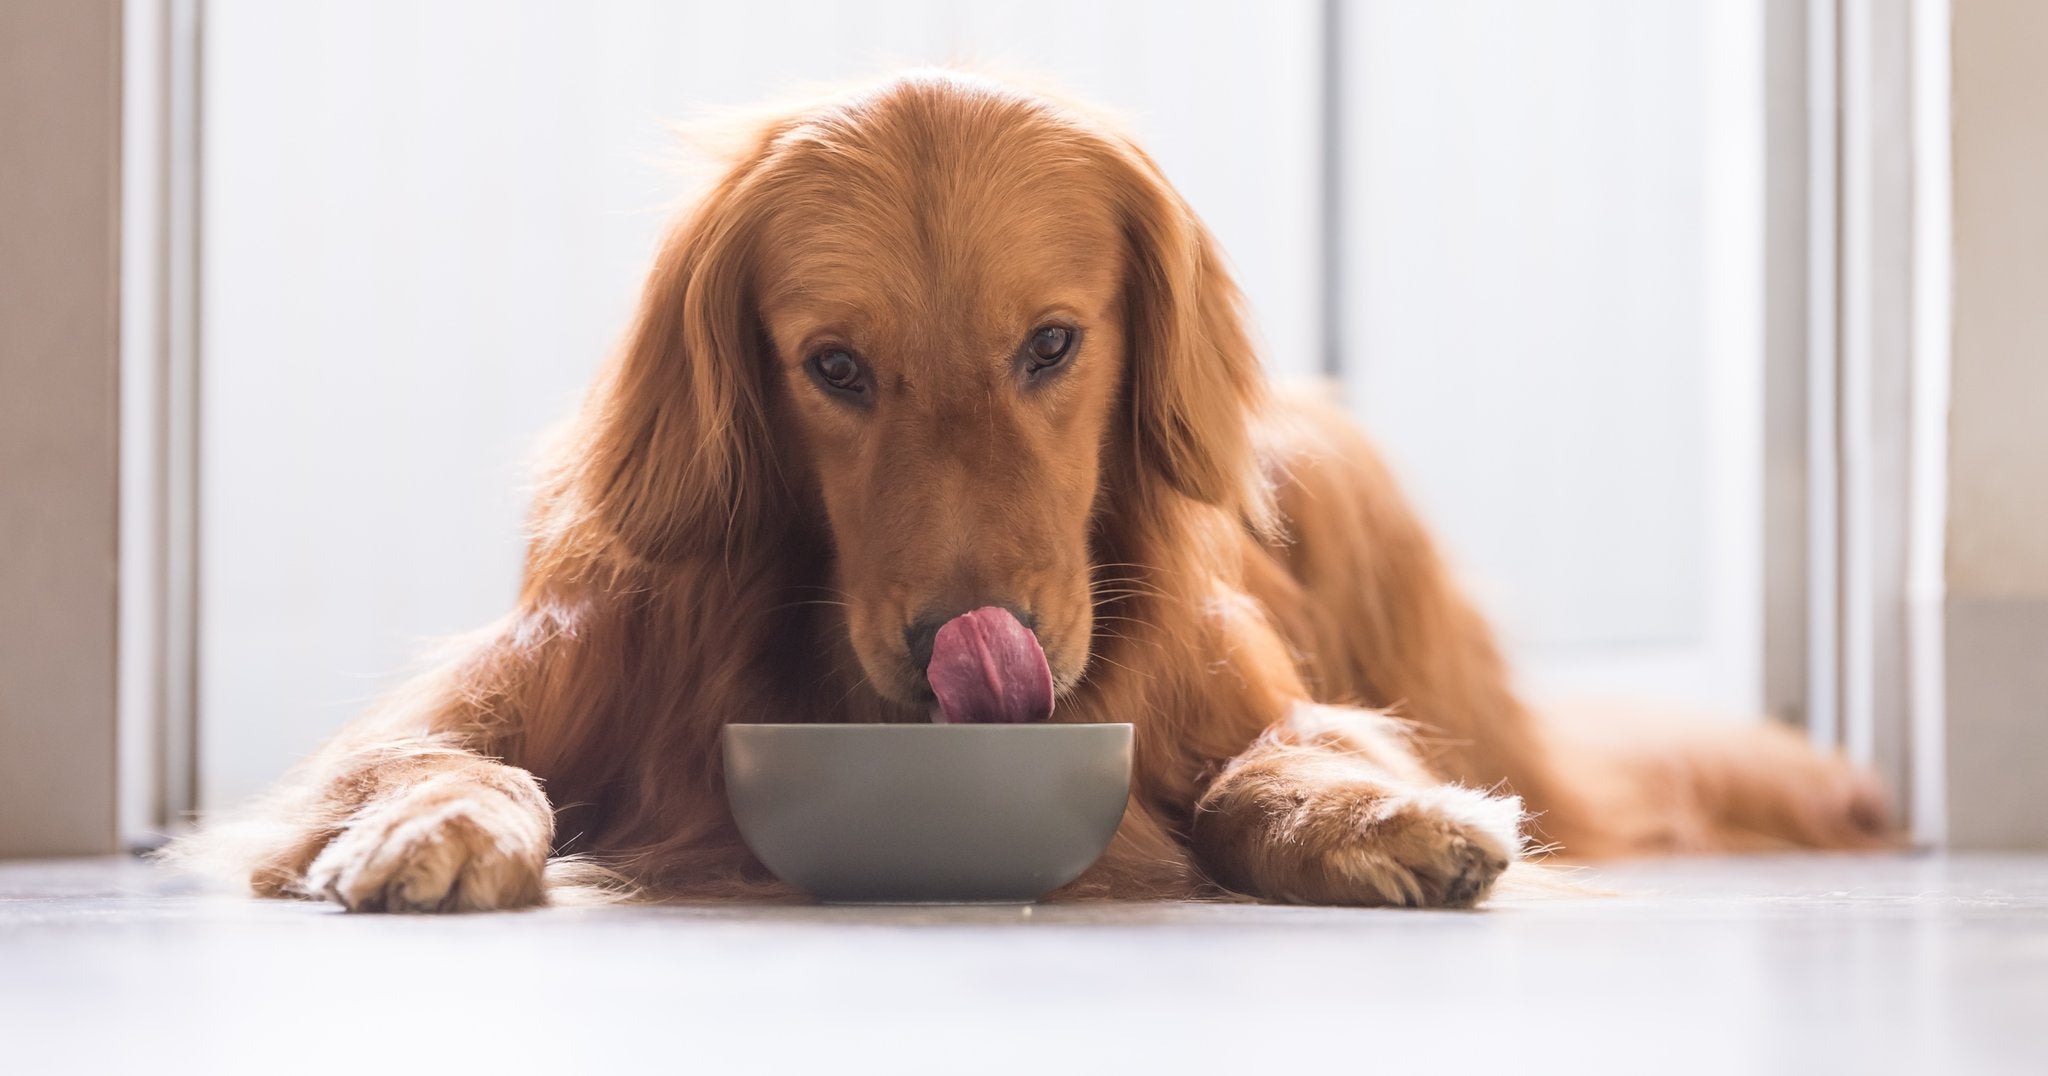 How to help your dog’s sensitive stomach